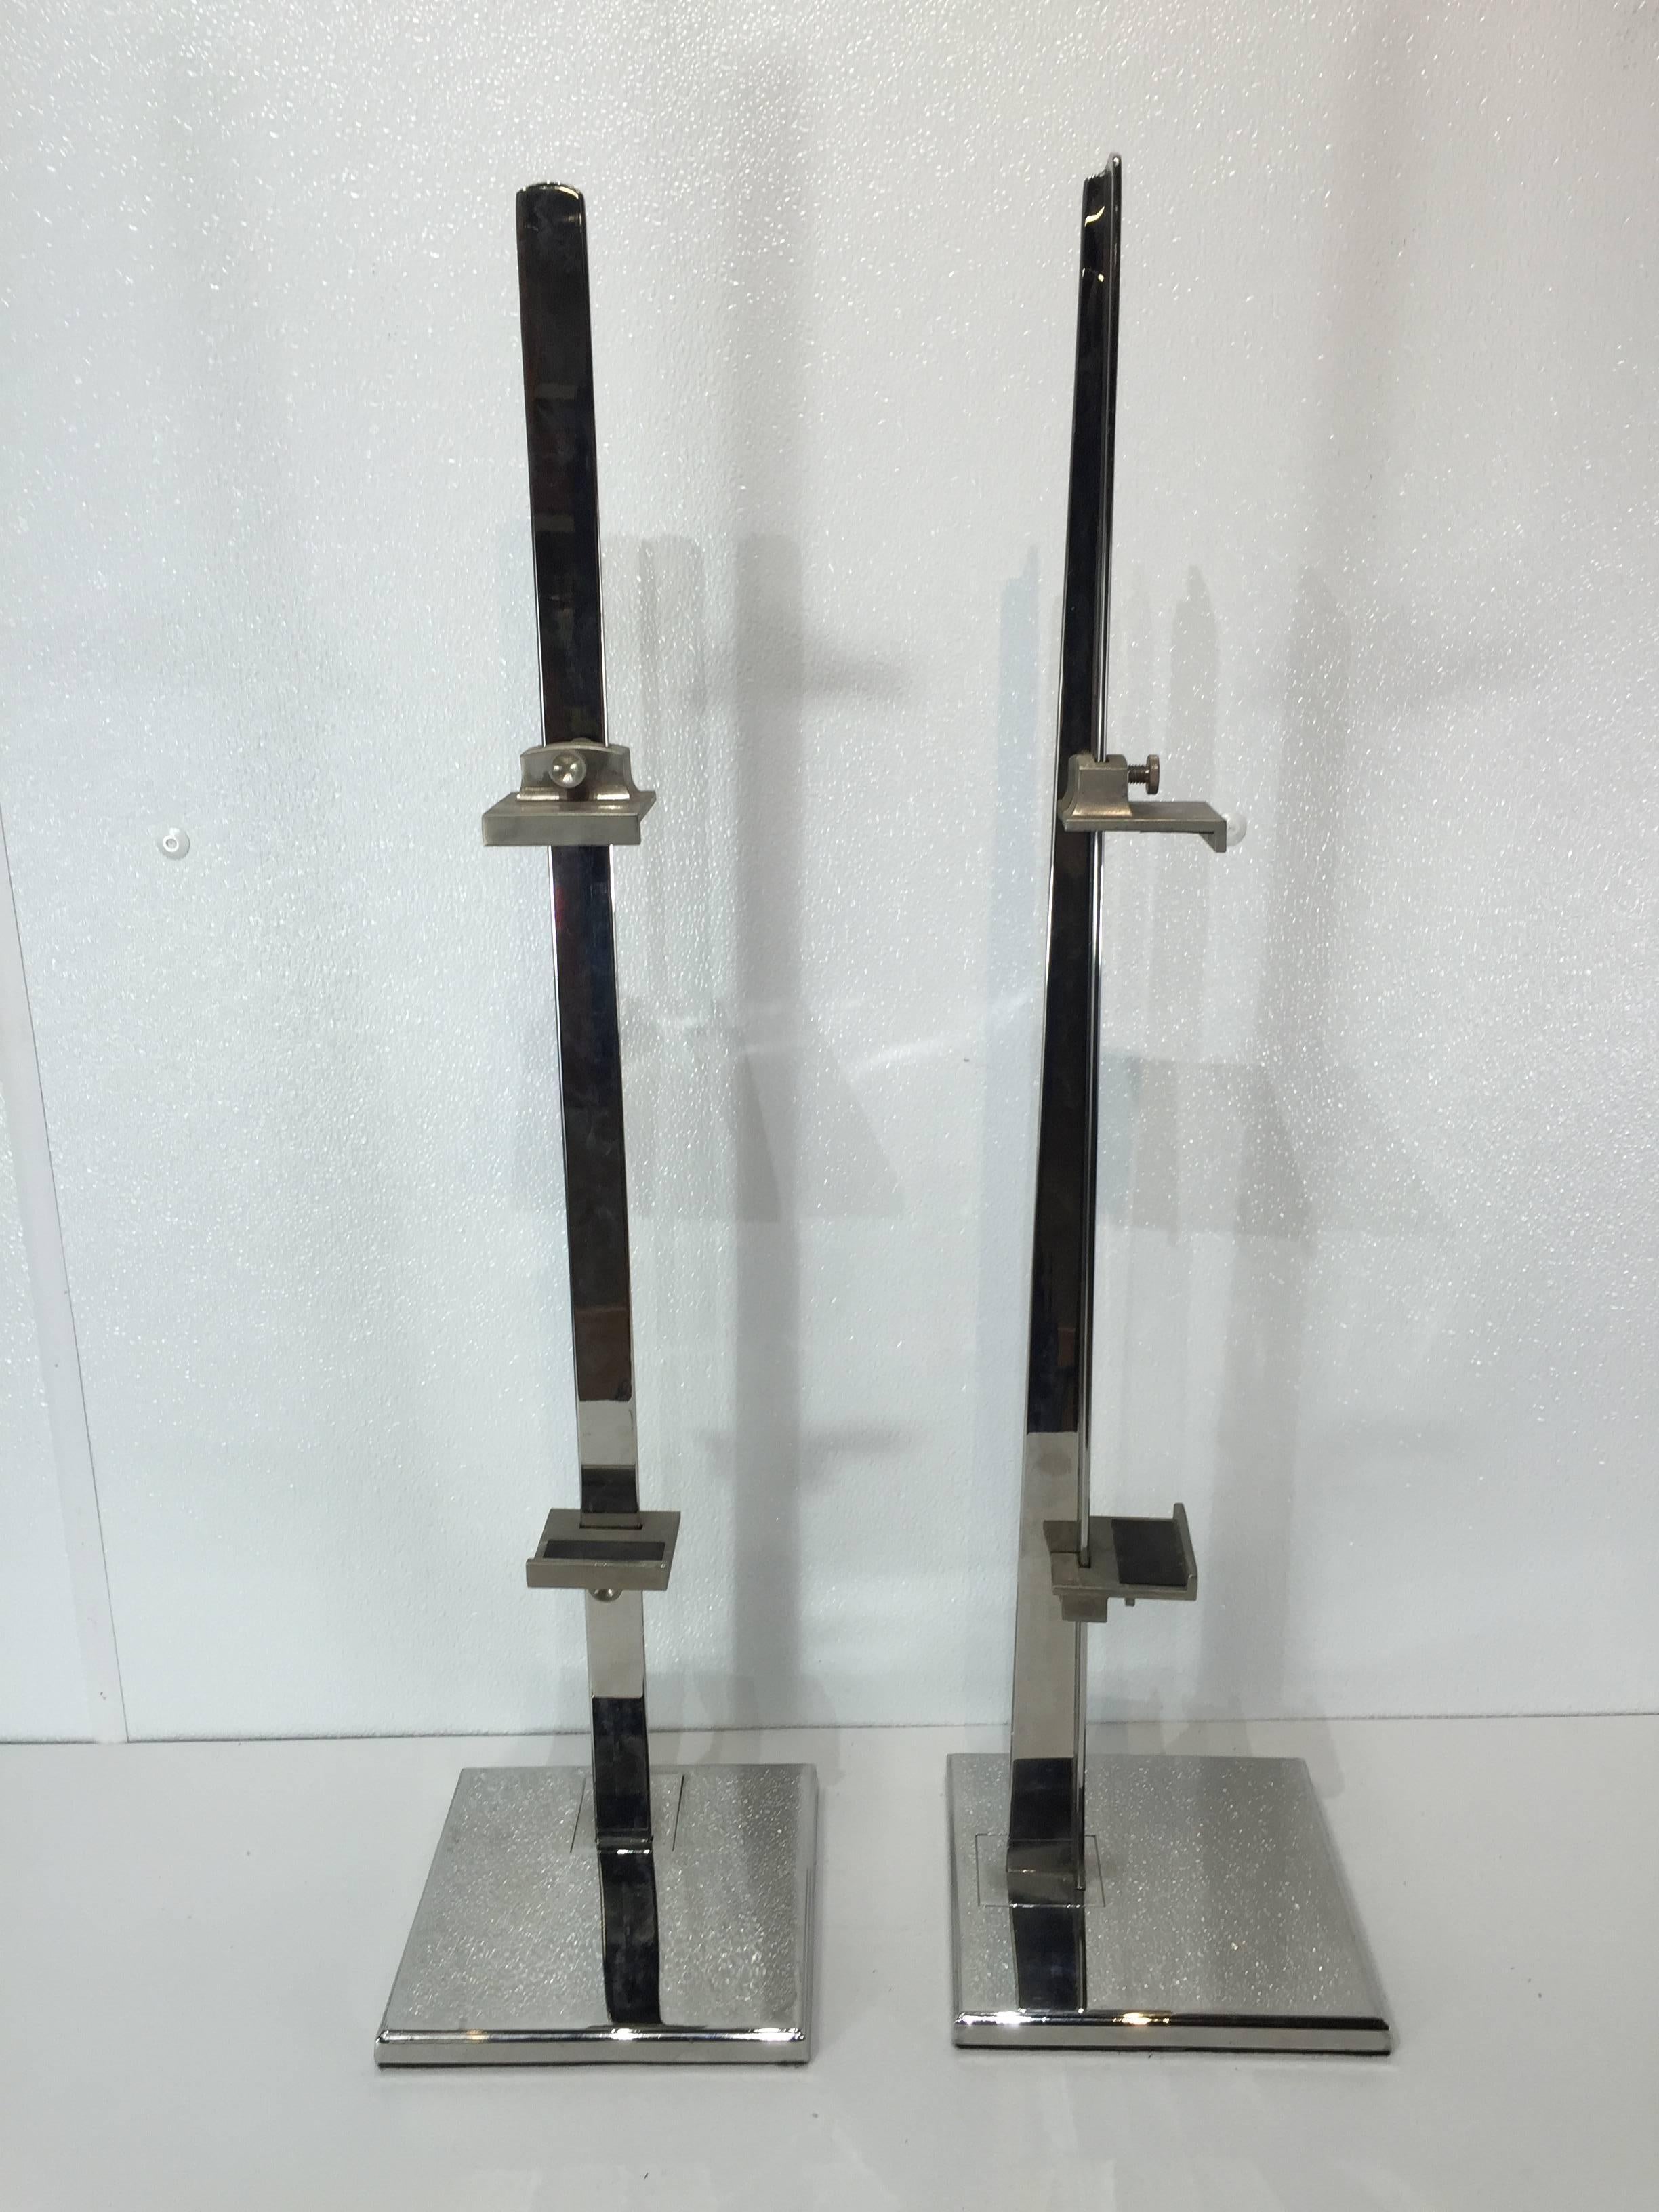 Pair of 1970s chrome museum easels.
Each one of typical form with polished chrome with 2.5